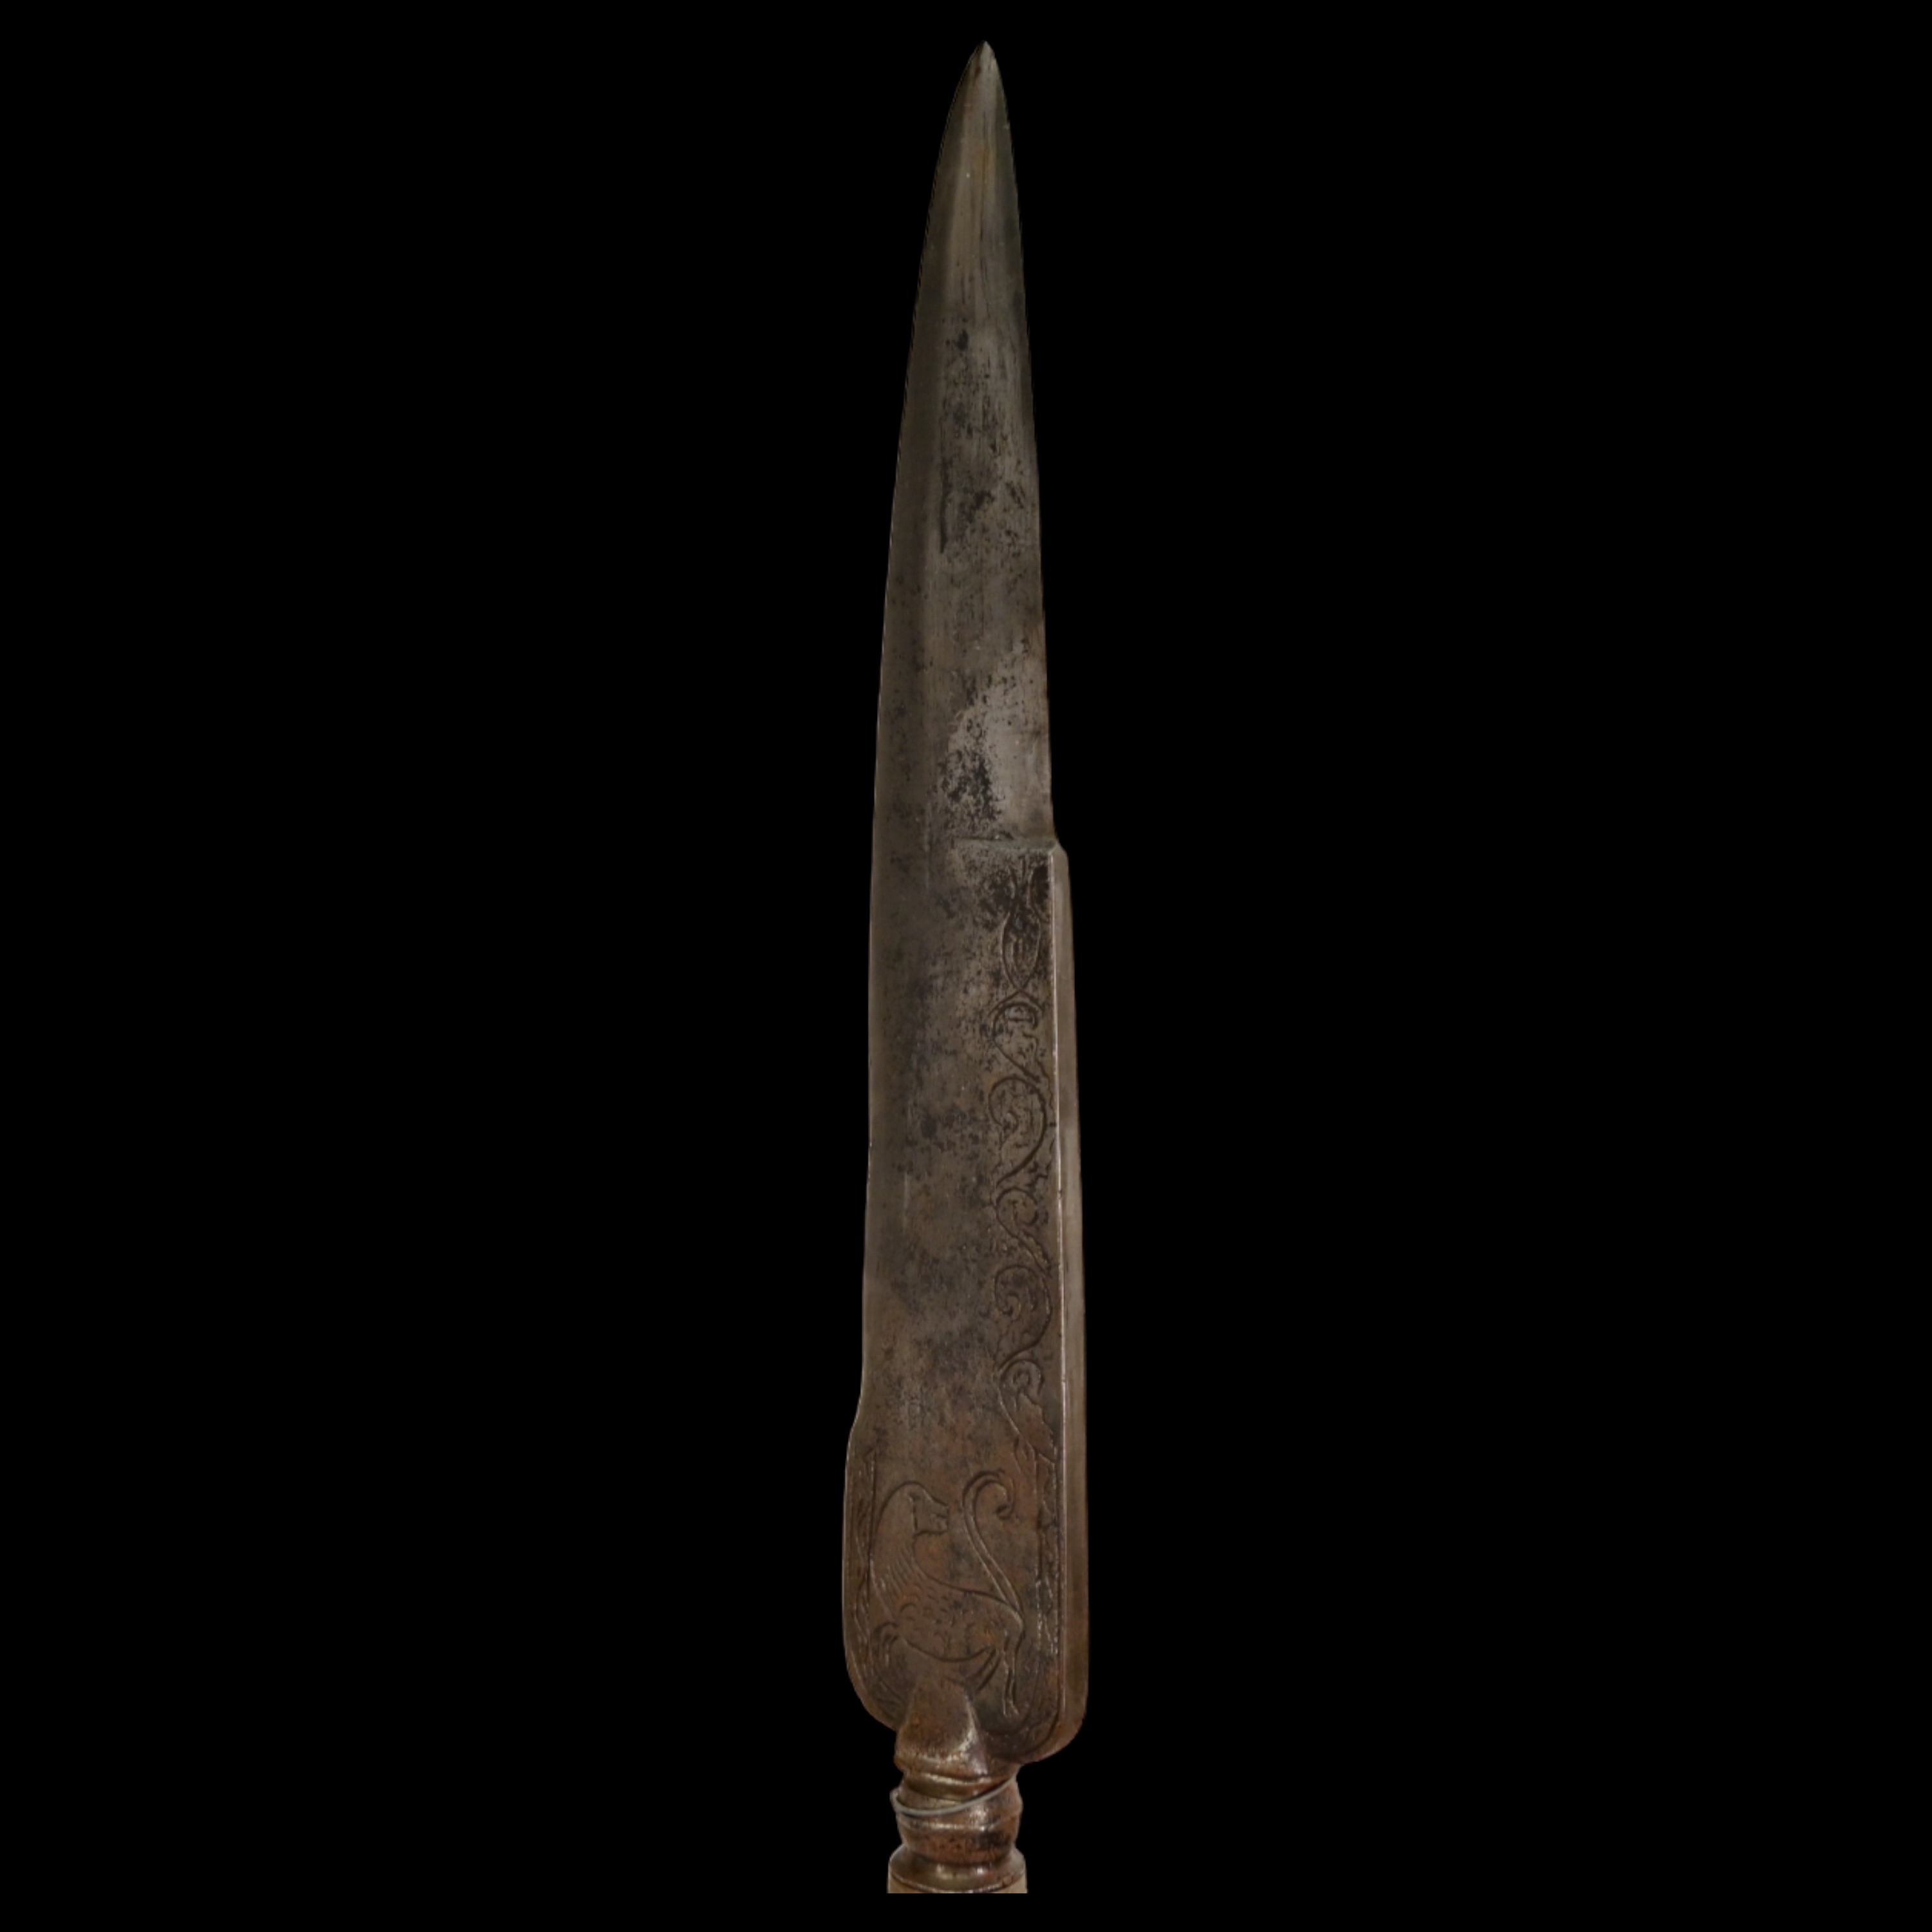 A Italian hunting knife, late 18th C., with engraving on the blade, horn handle in a silver mounting - Image 9 of 9